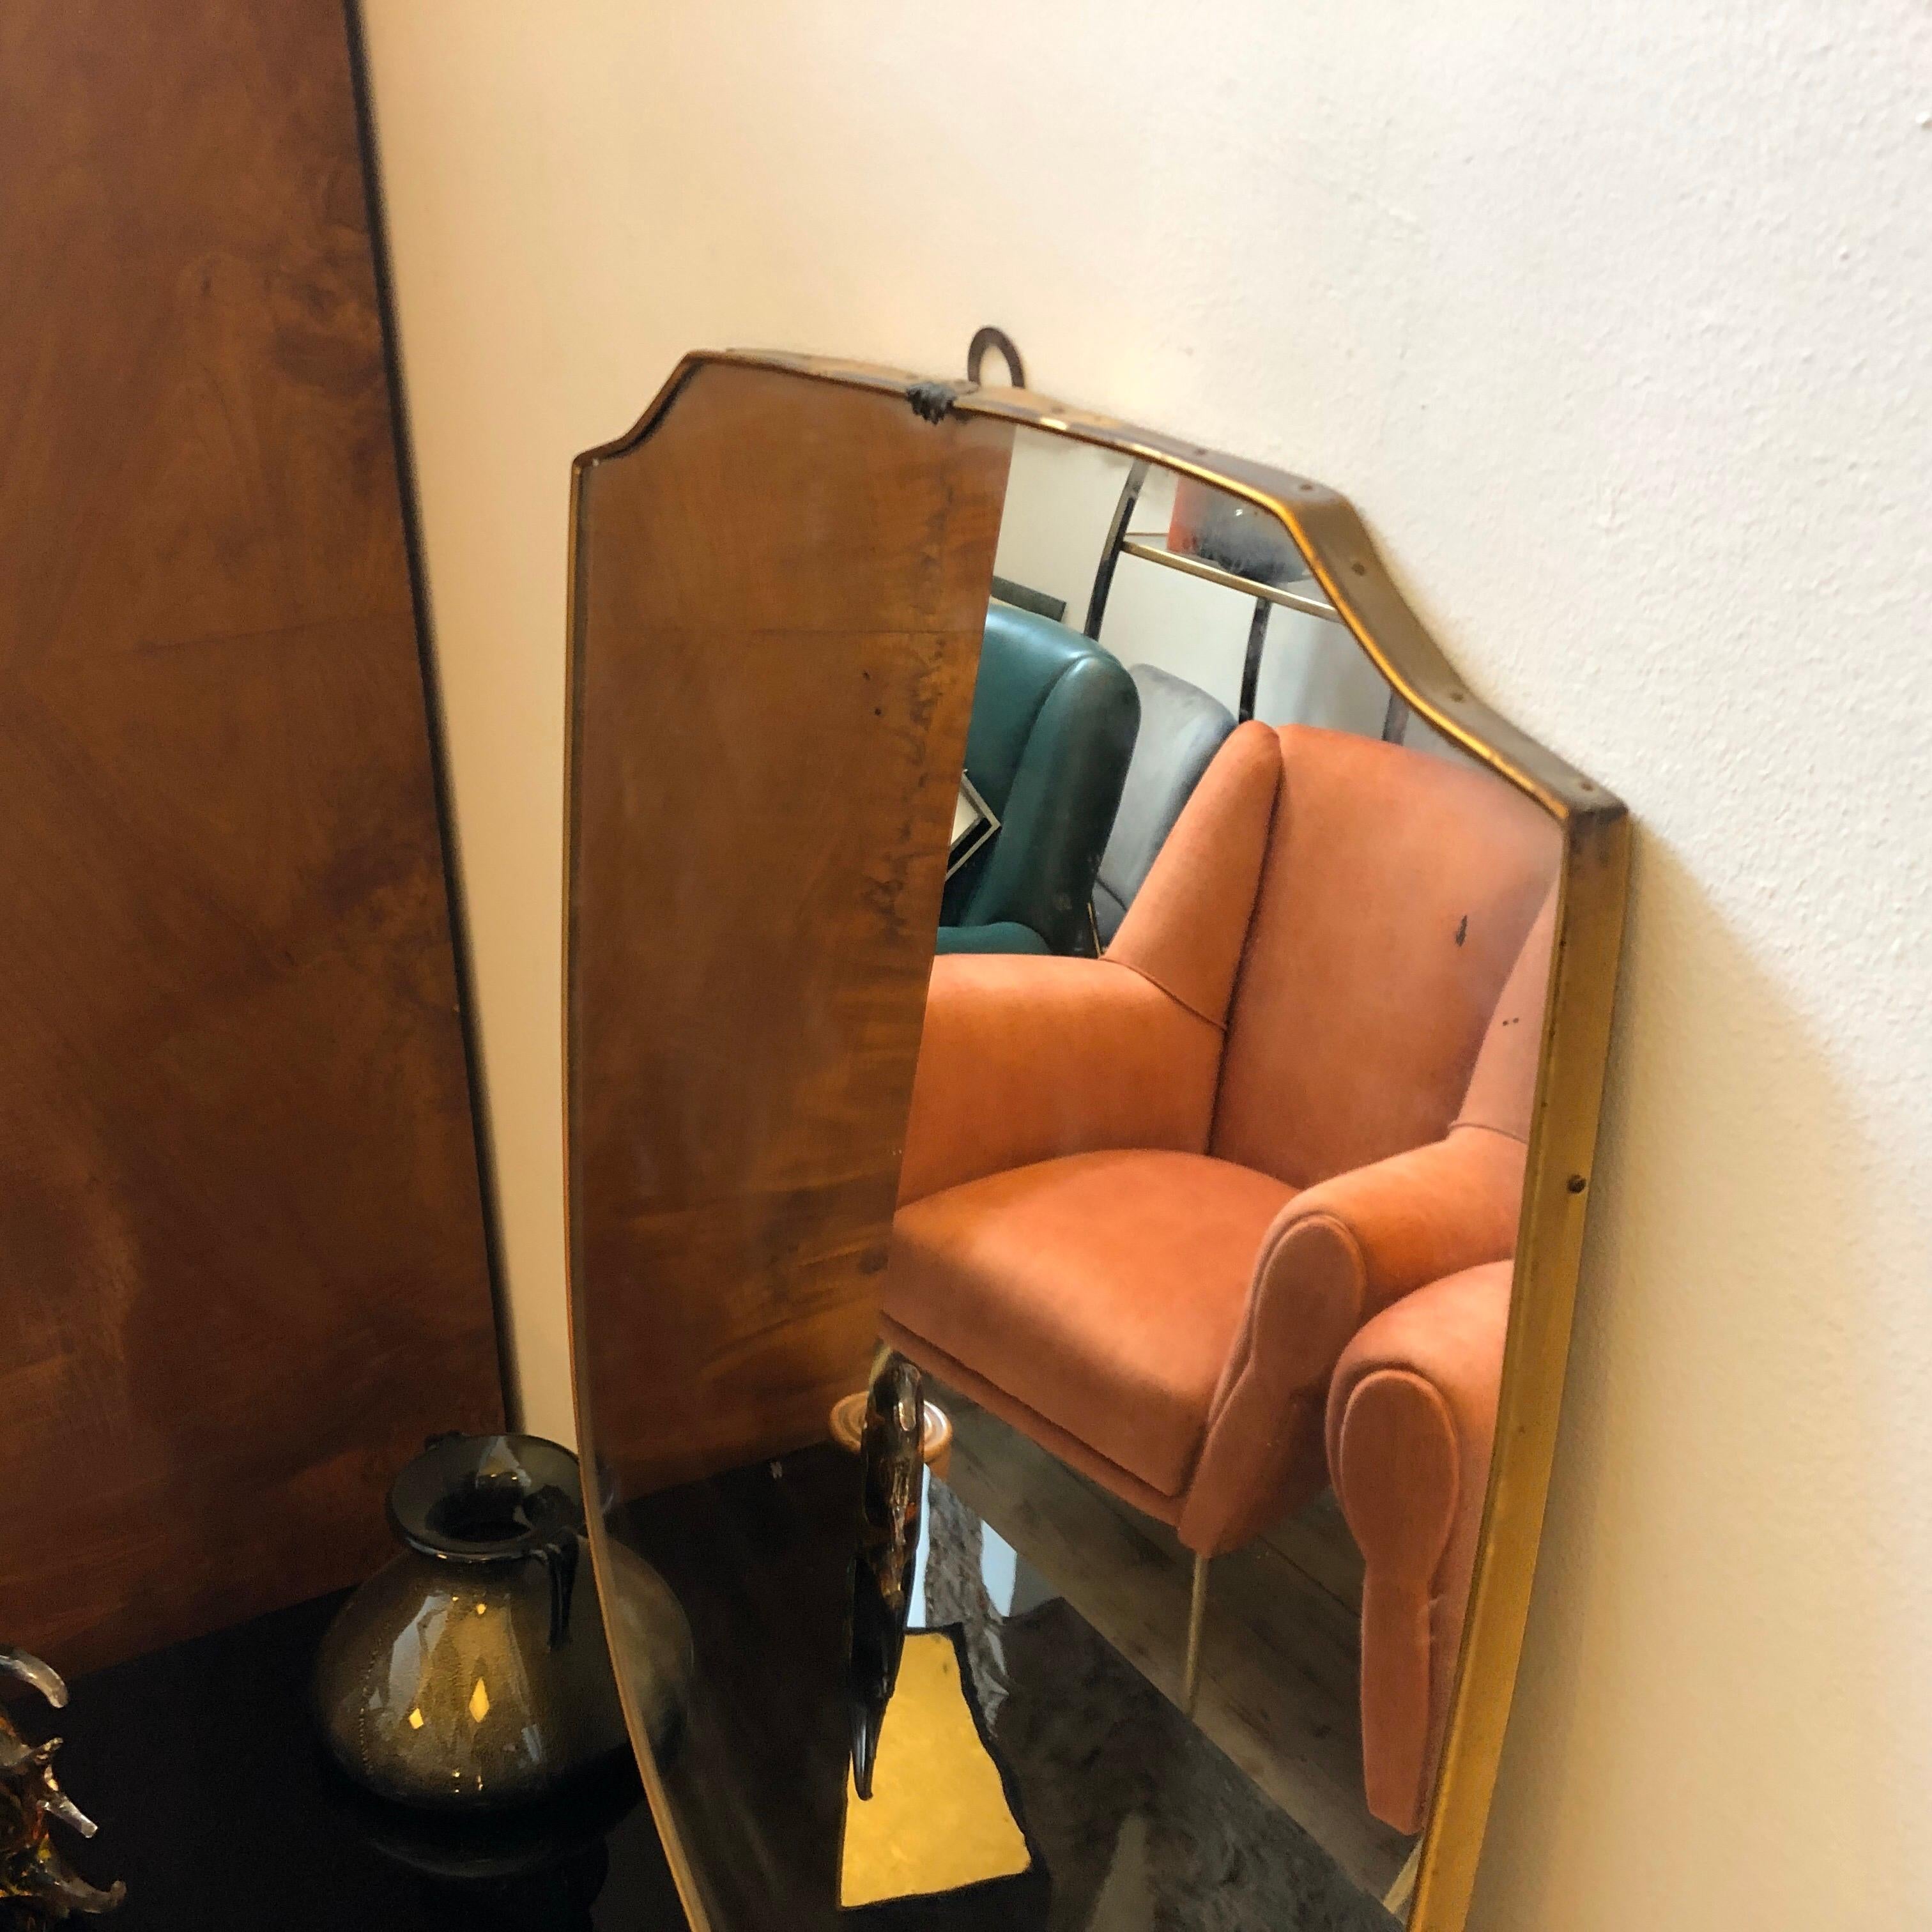 Stylish wall mirror made in Italy in the 1950s, good conditions overall.